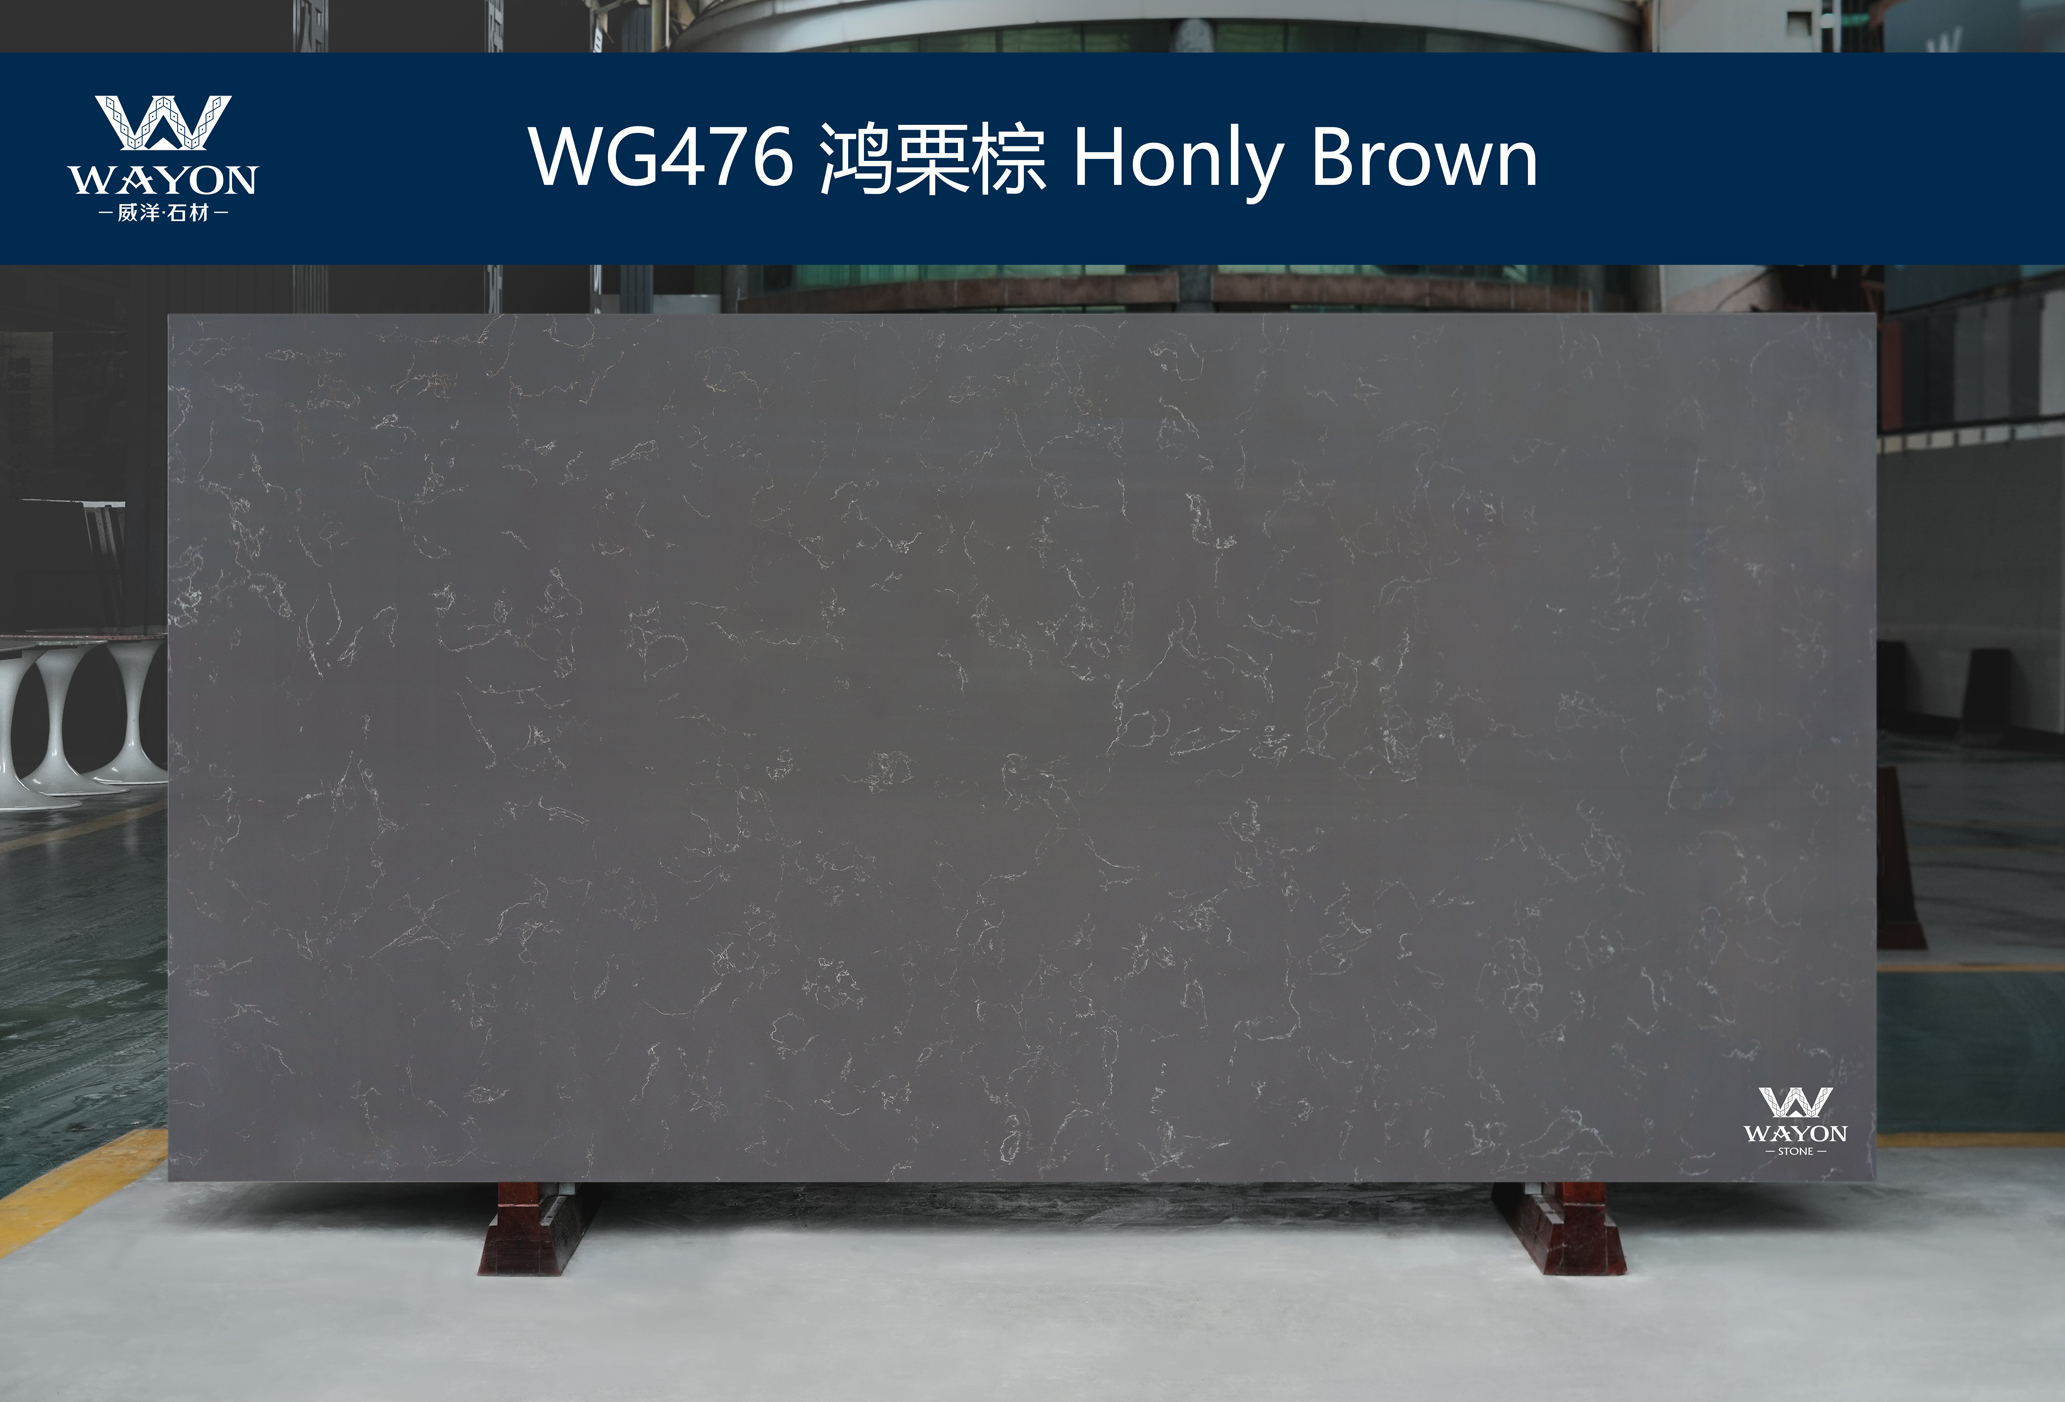 WG476 Honly Brown